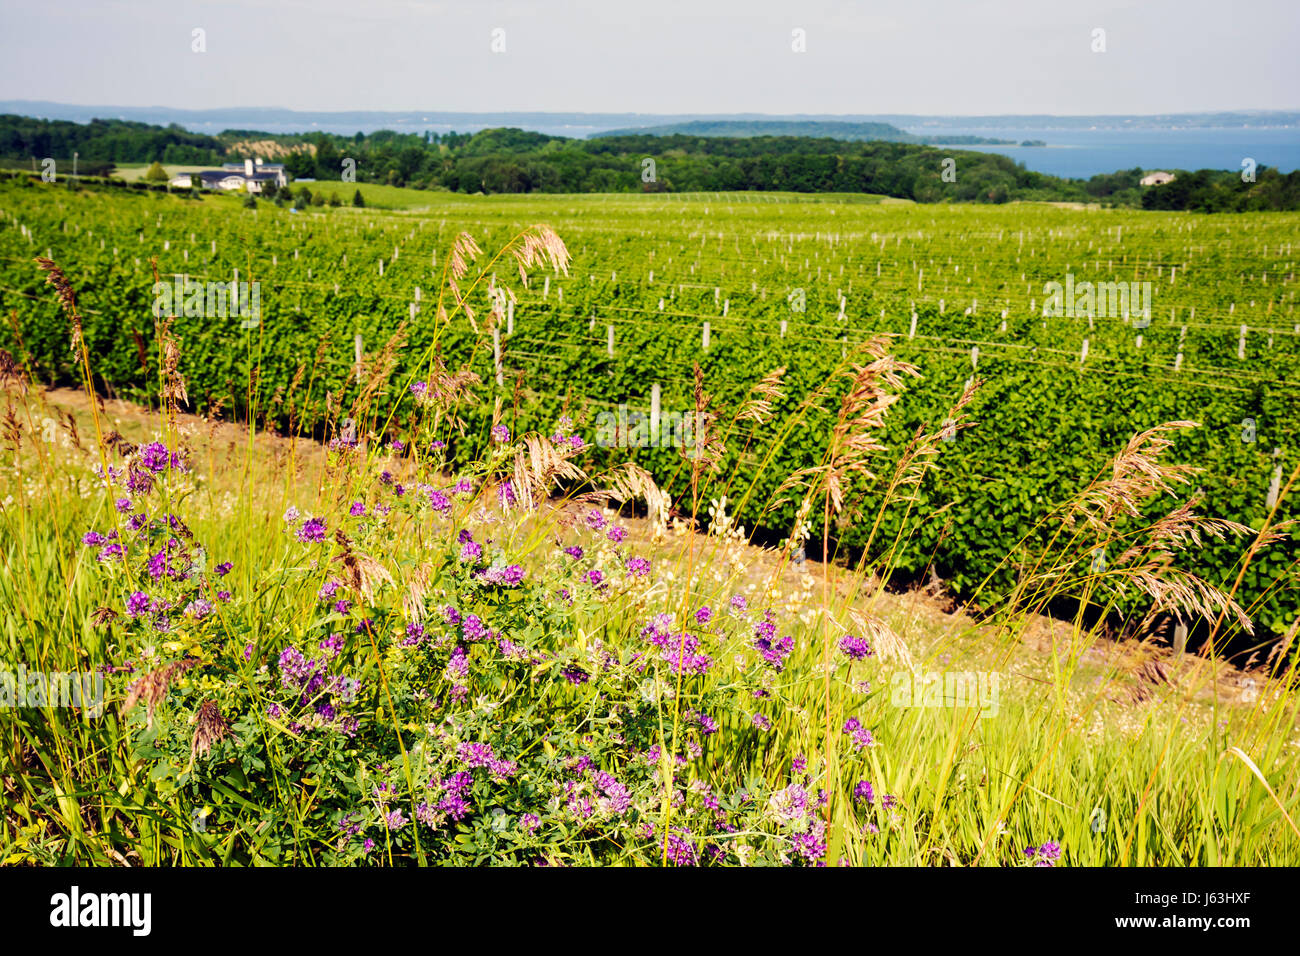 Michigan Traverse City,Old Mission Peninsula,Chateau Grand Traverse,vineyard West Arm Grand Traverse Bay,viticulture,plants,grapes,vines,scenic,wildfl Stock Photo